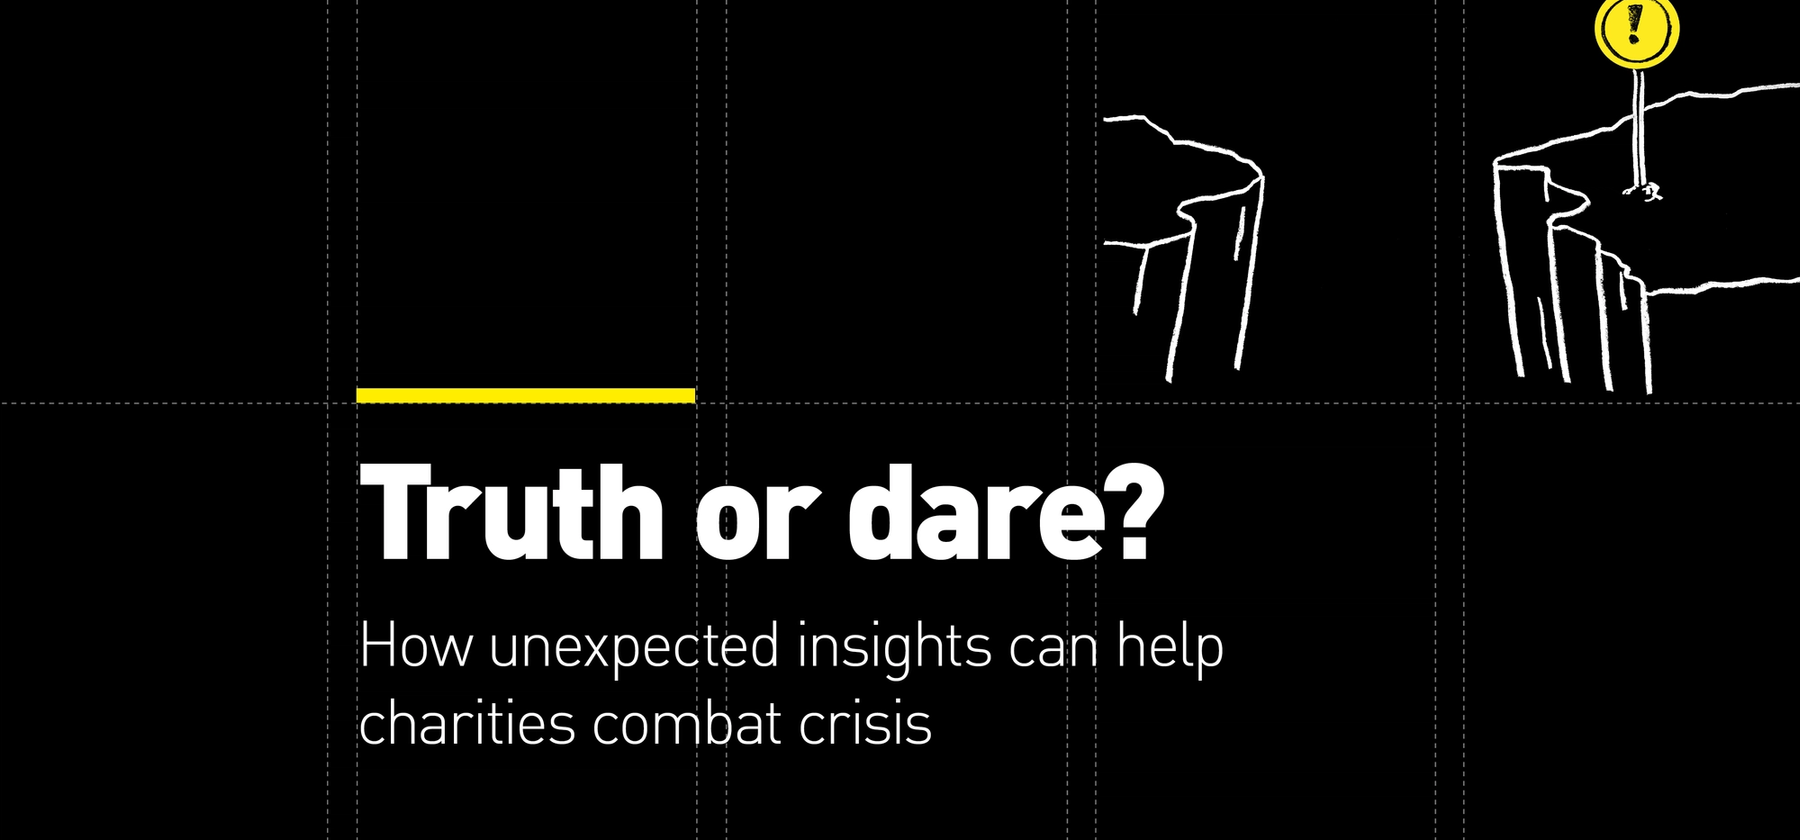 psLondon Webinar | Truth or dare? How unexpected insight can help charities combat crisis.